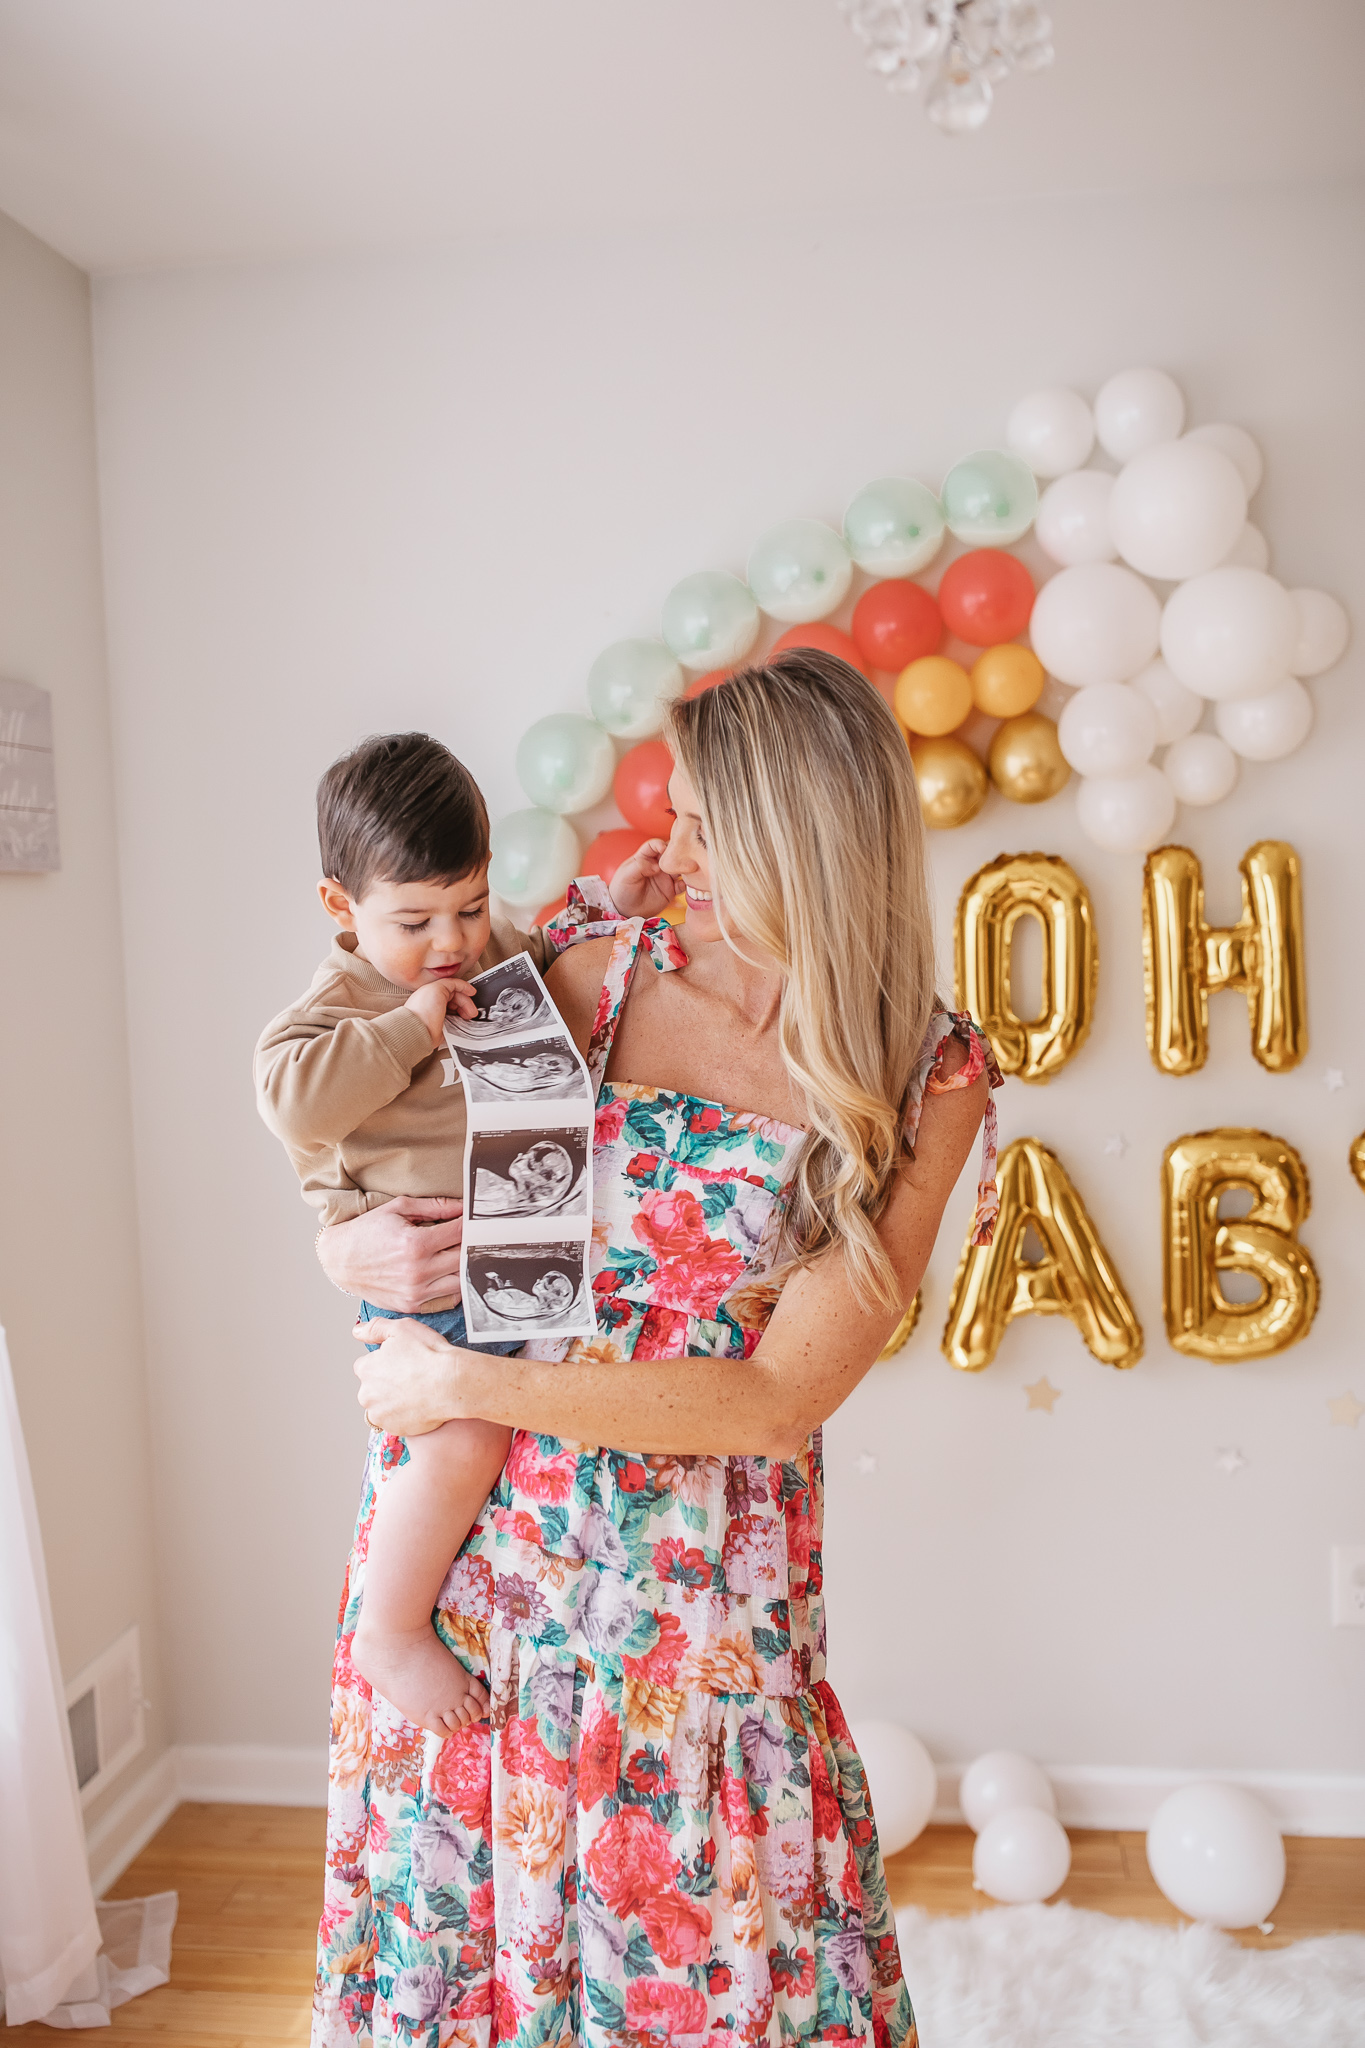 DIY Rainbow Baby Pregnancy Announcement. Mommy to be and big brother with the ultrasound. Rainbow baby balloon backdrop for photos.